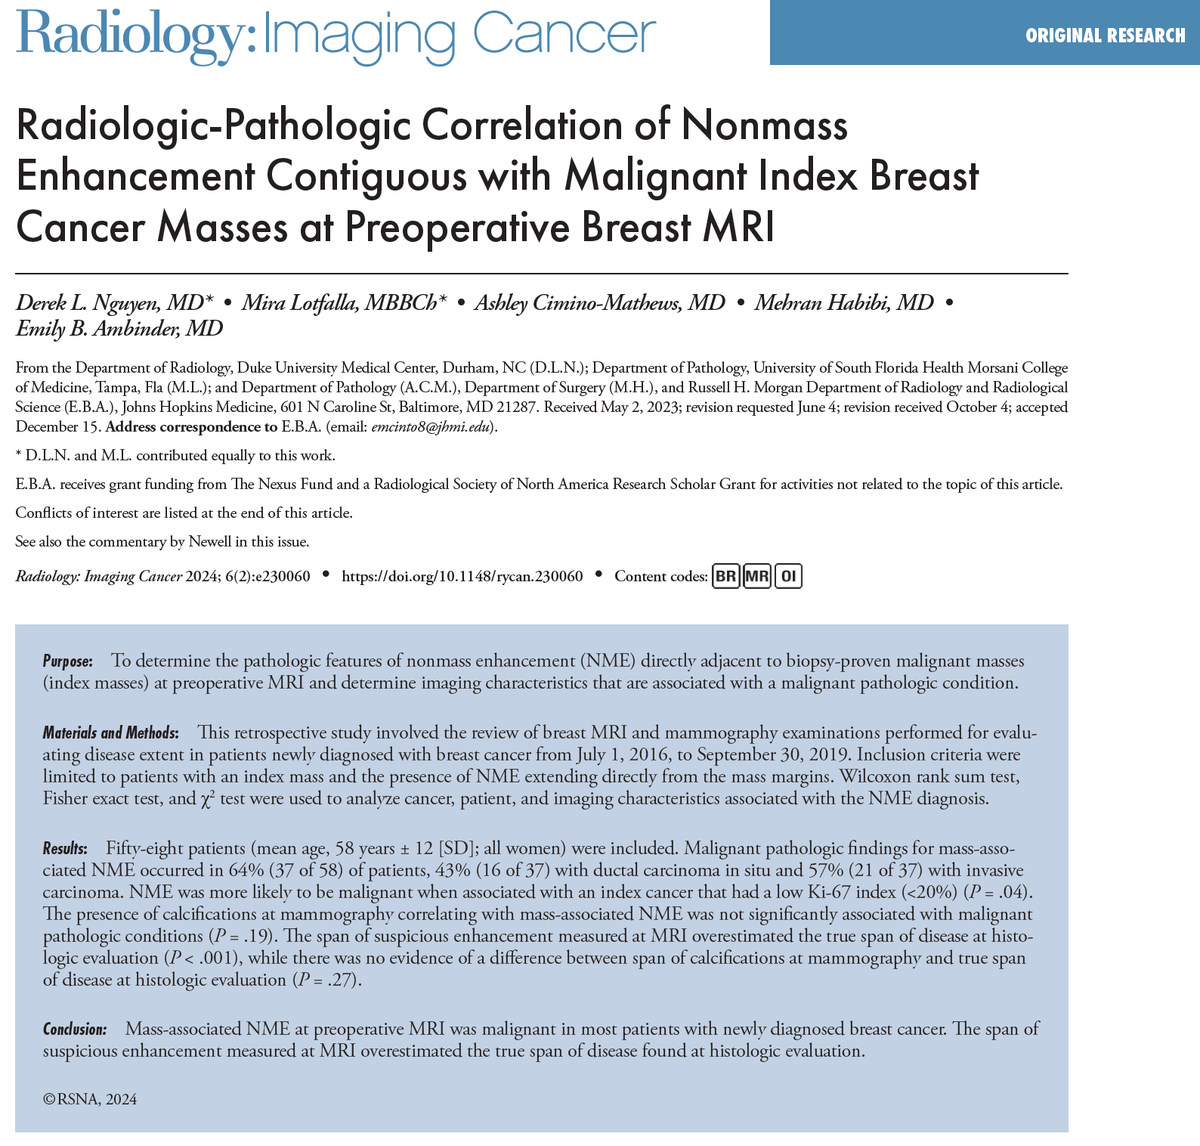 🔥 Hot off the press from Radiology: Imaging Cancer: 'Radiologic-Pathologic Correlation of Nonmass Enhancement Contiguous with Malignant Index Breast Cancer Masses at Preoperative Breast MRI' by Nguyen et al. Article: doi.org/10.1148/rycan.… #CancerImaging #Cancer